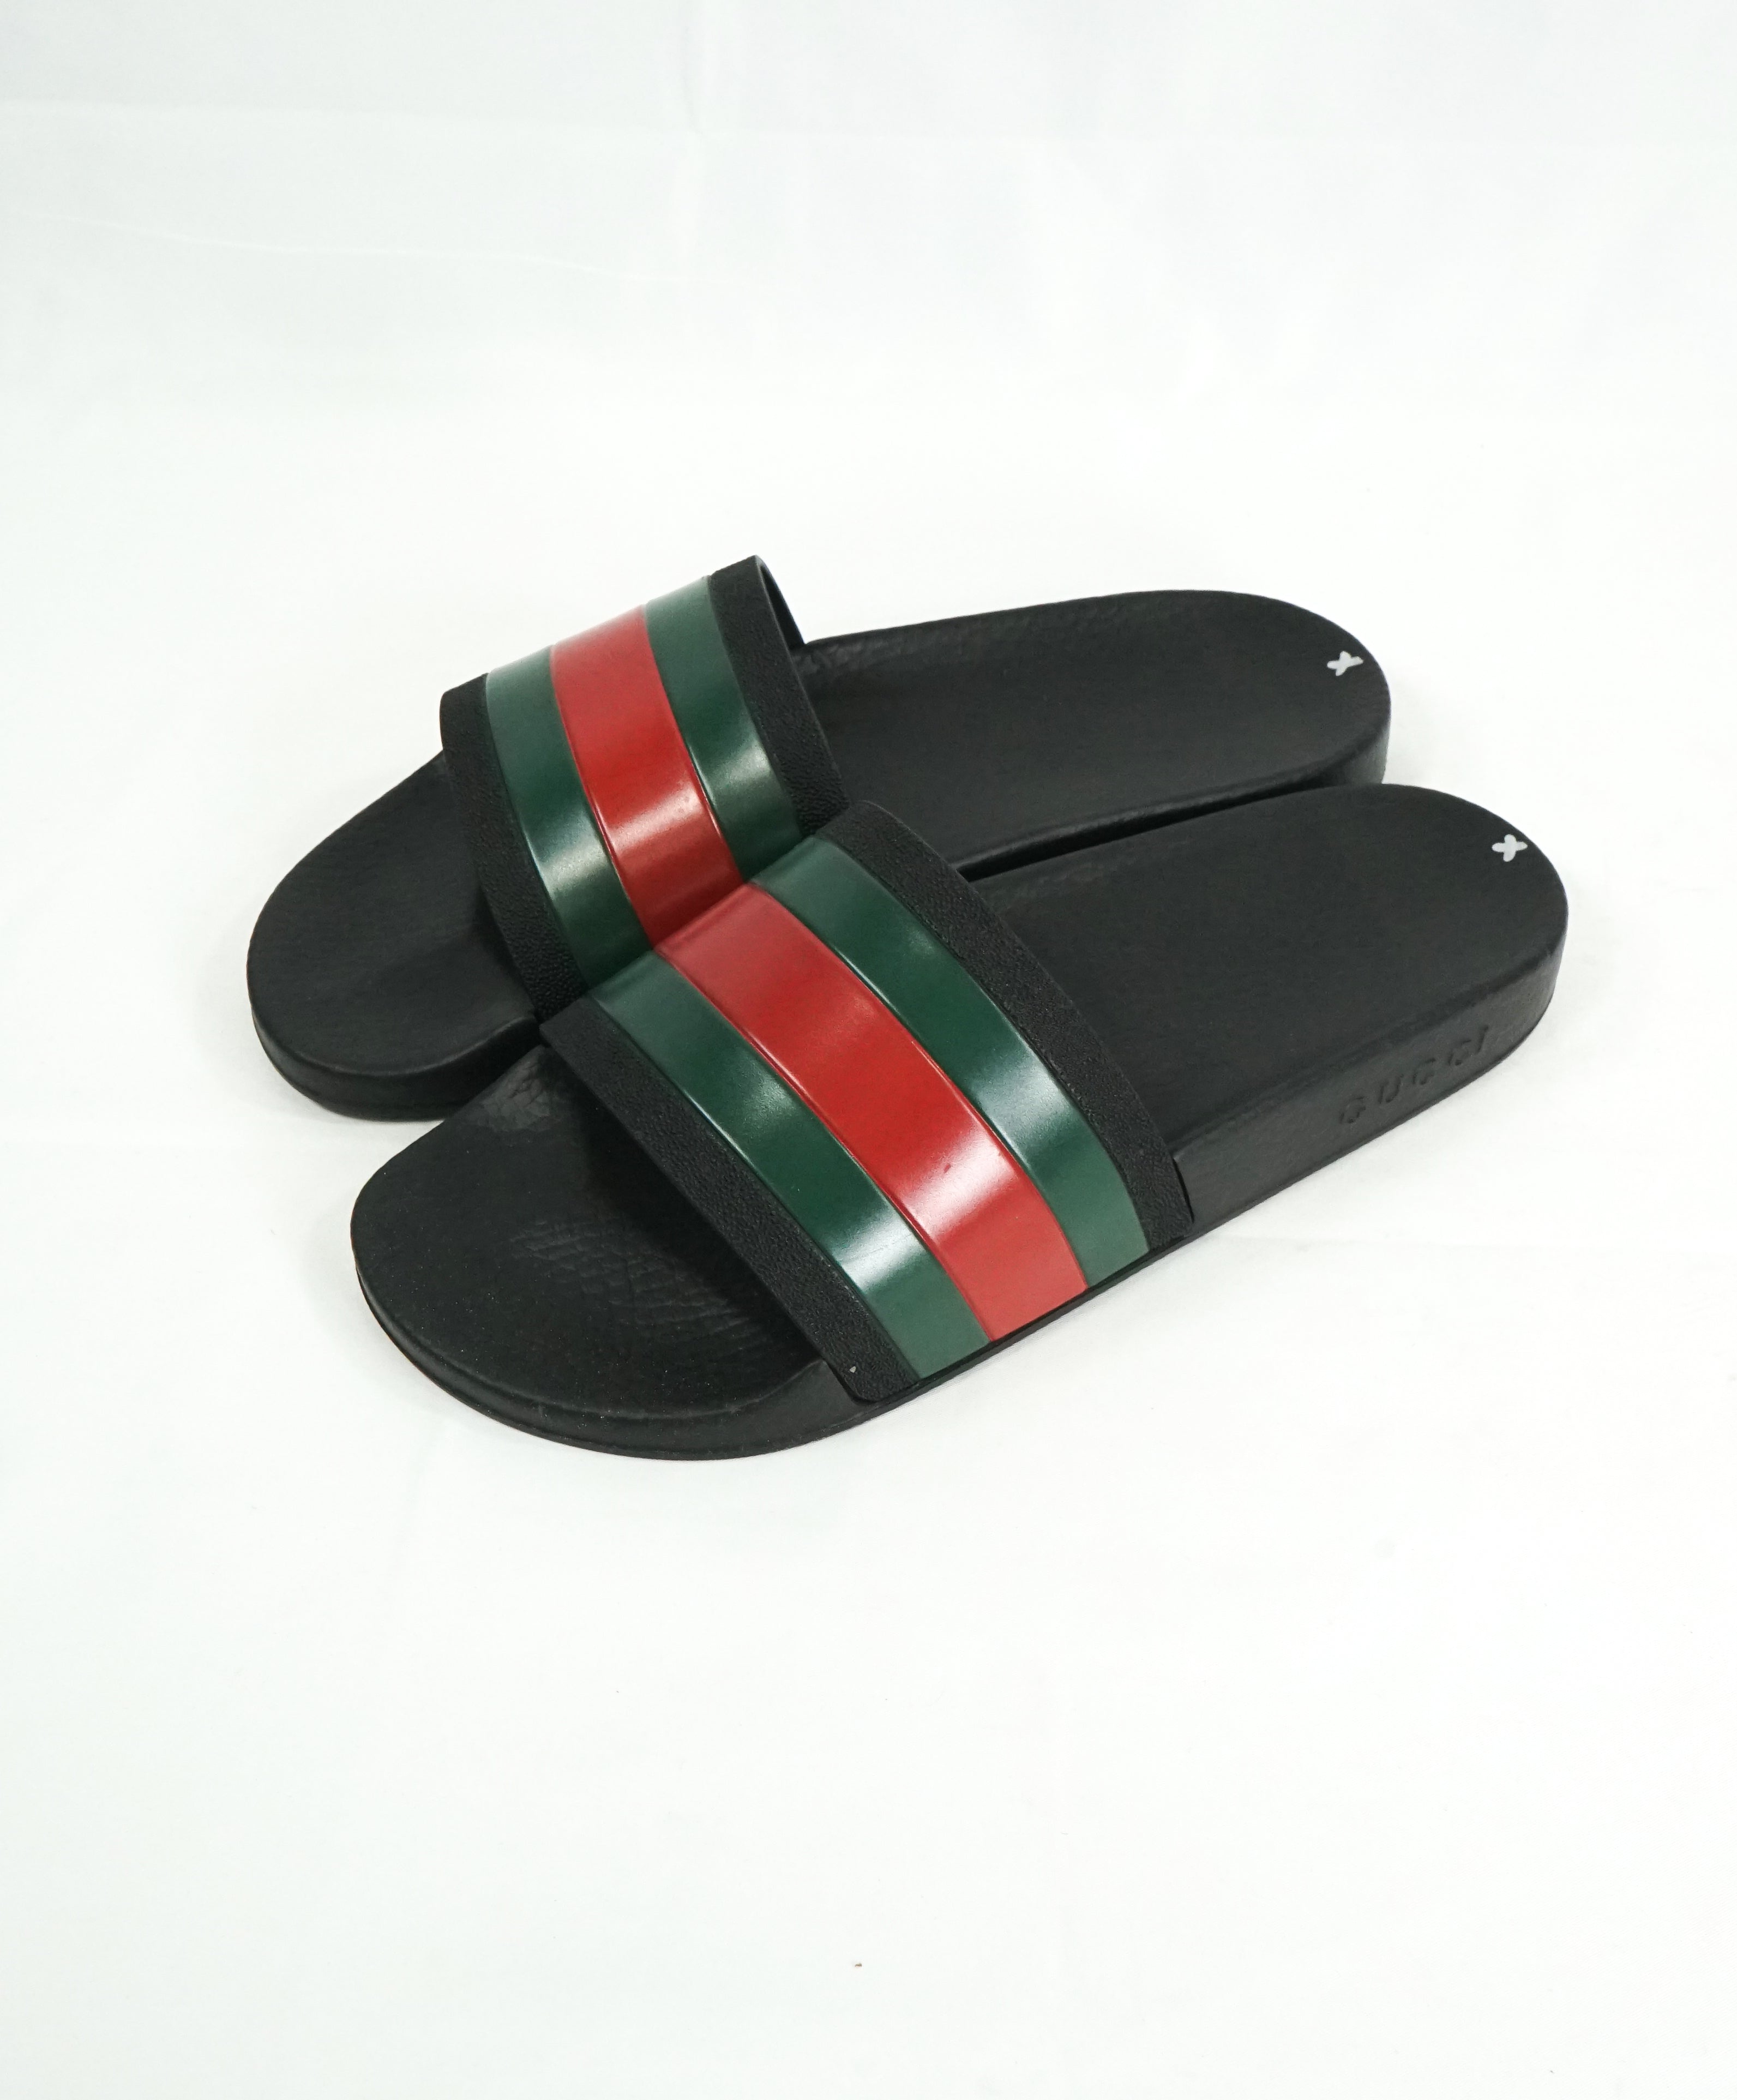 green and red gucci flip flops, OFF 78 